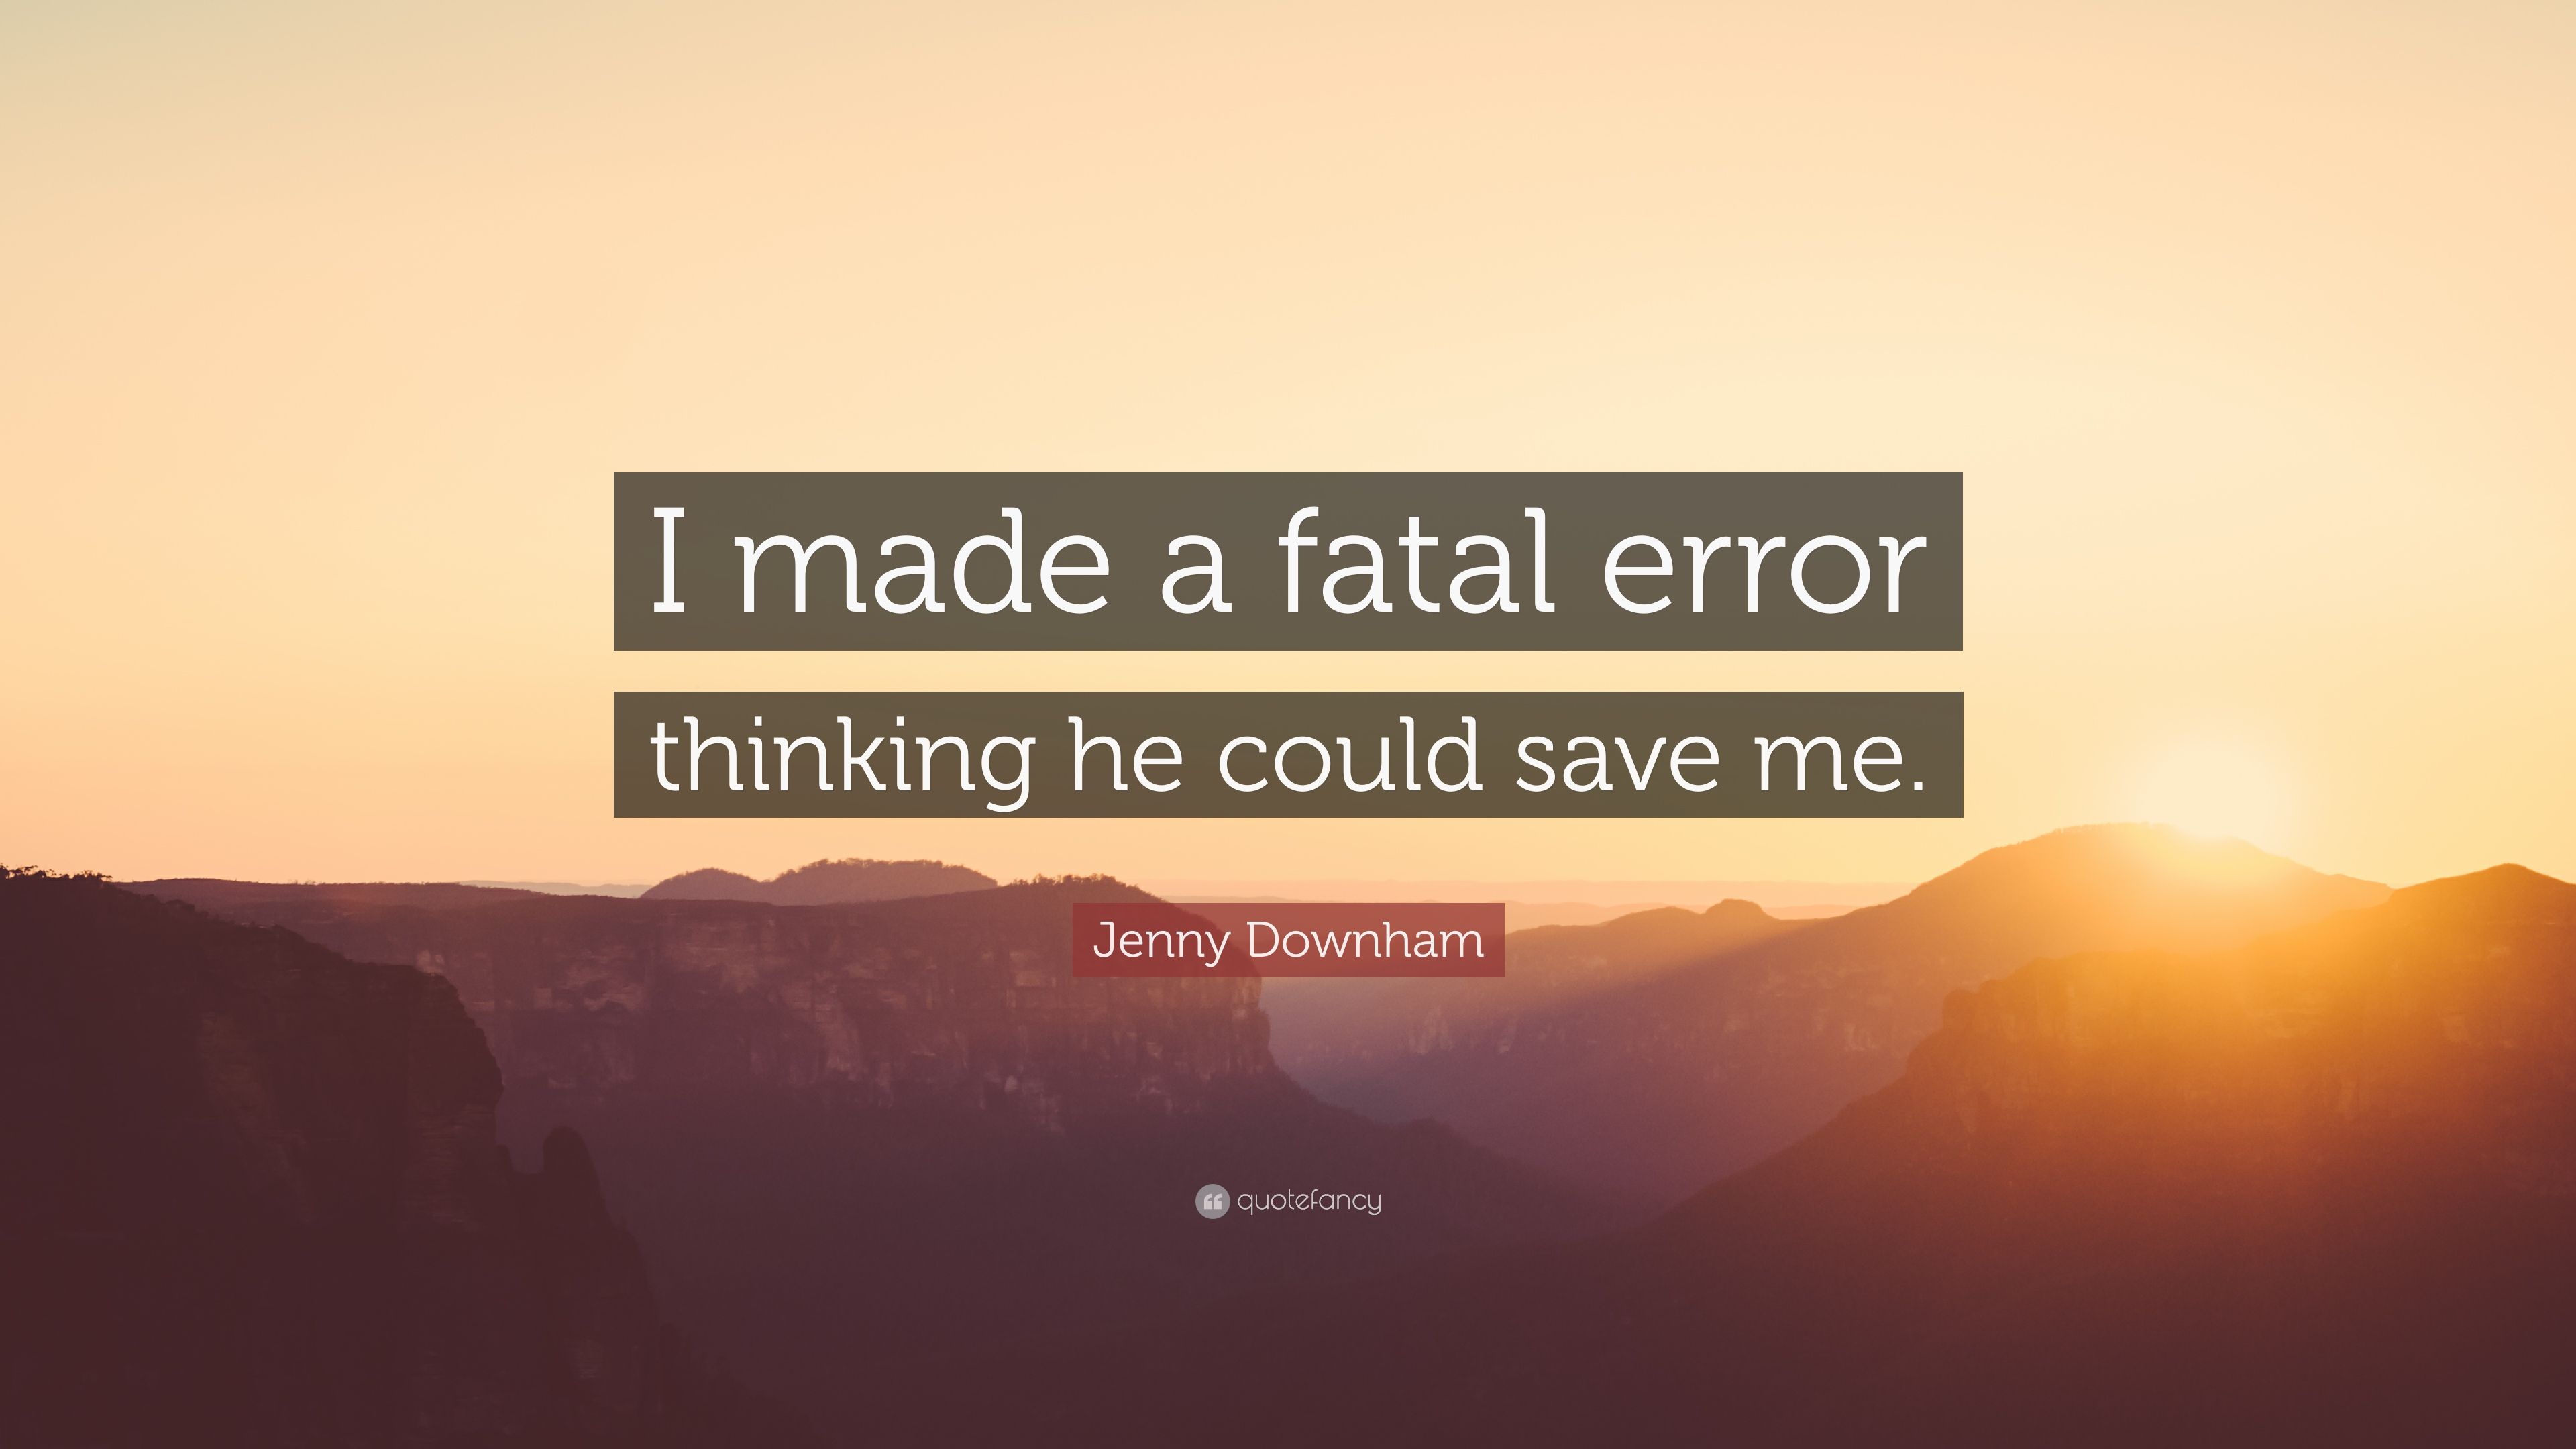 Jenny Downham Quote: “I made a fatal error thinking he could save